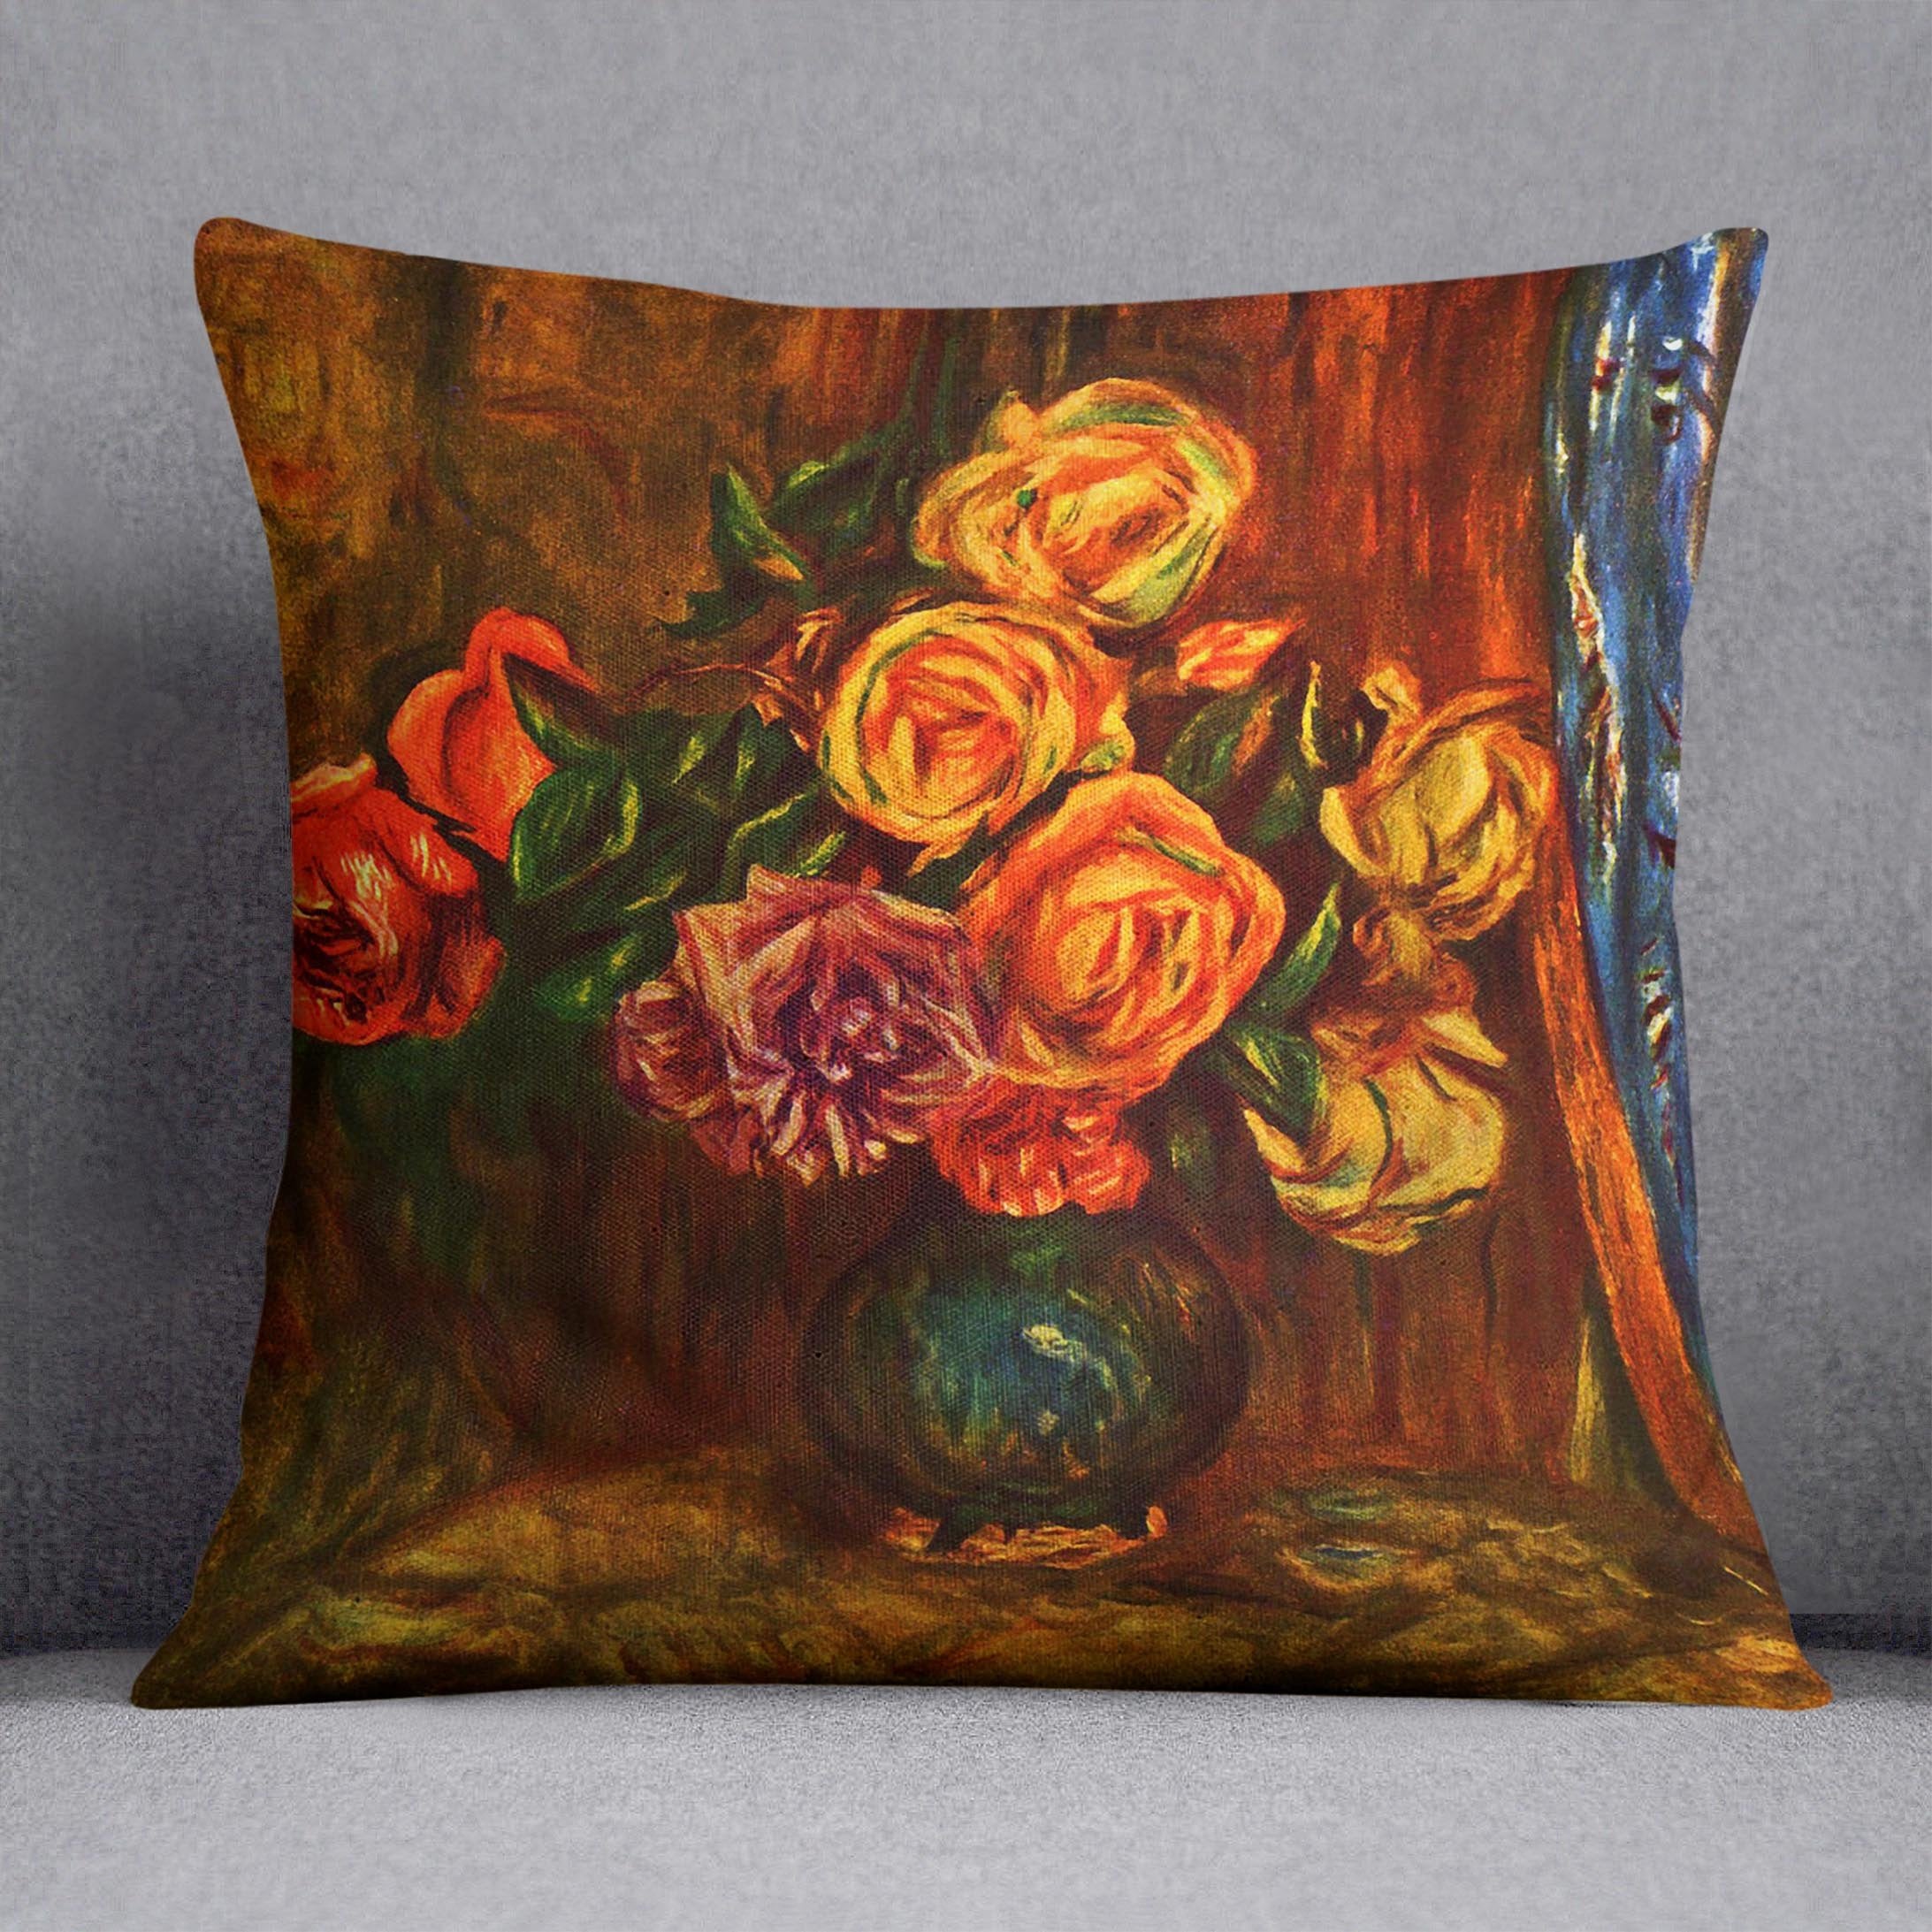 Still life roses before a blue curtain by Renoir Throw Pillow